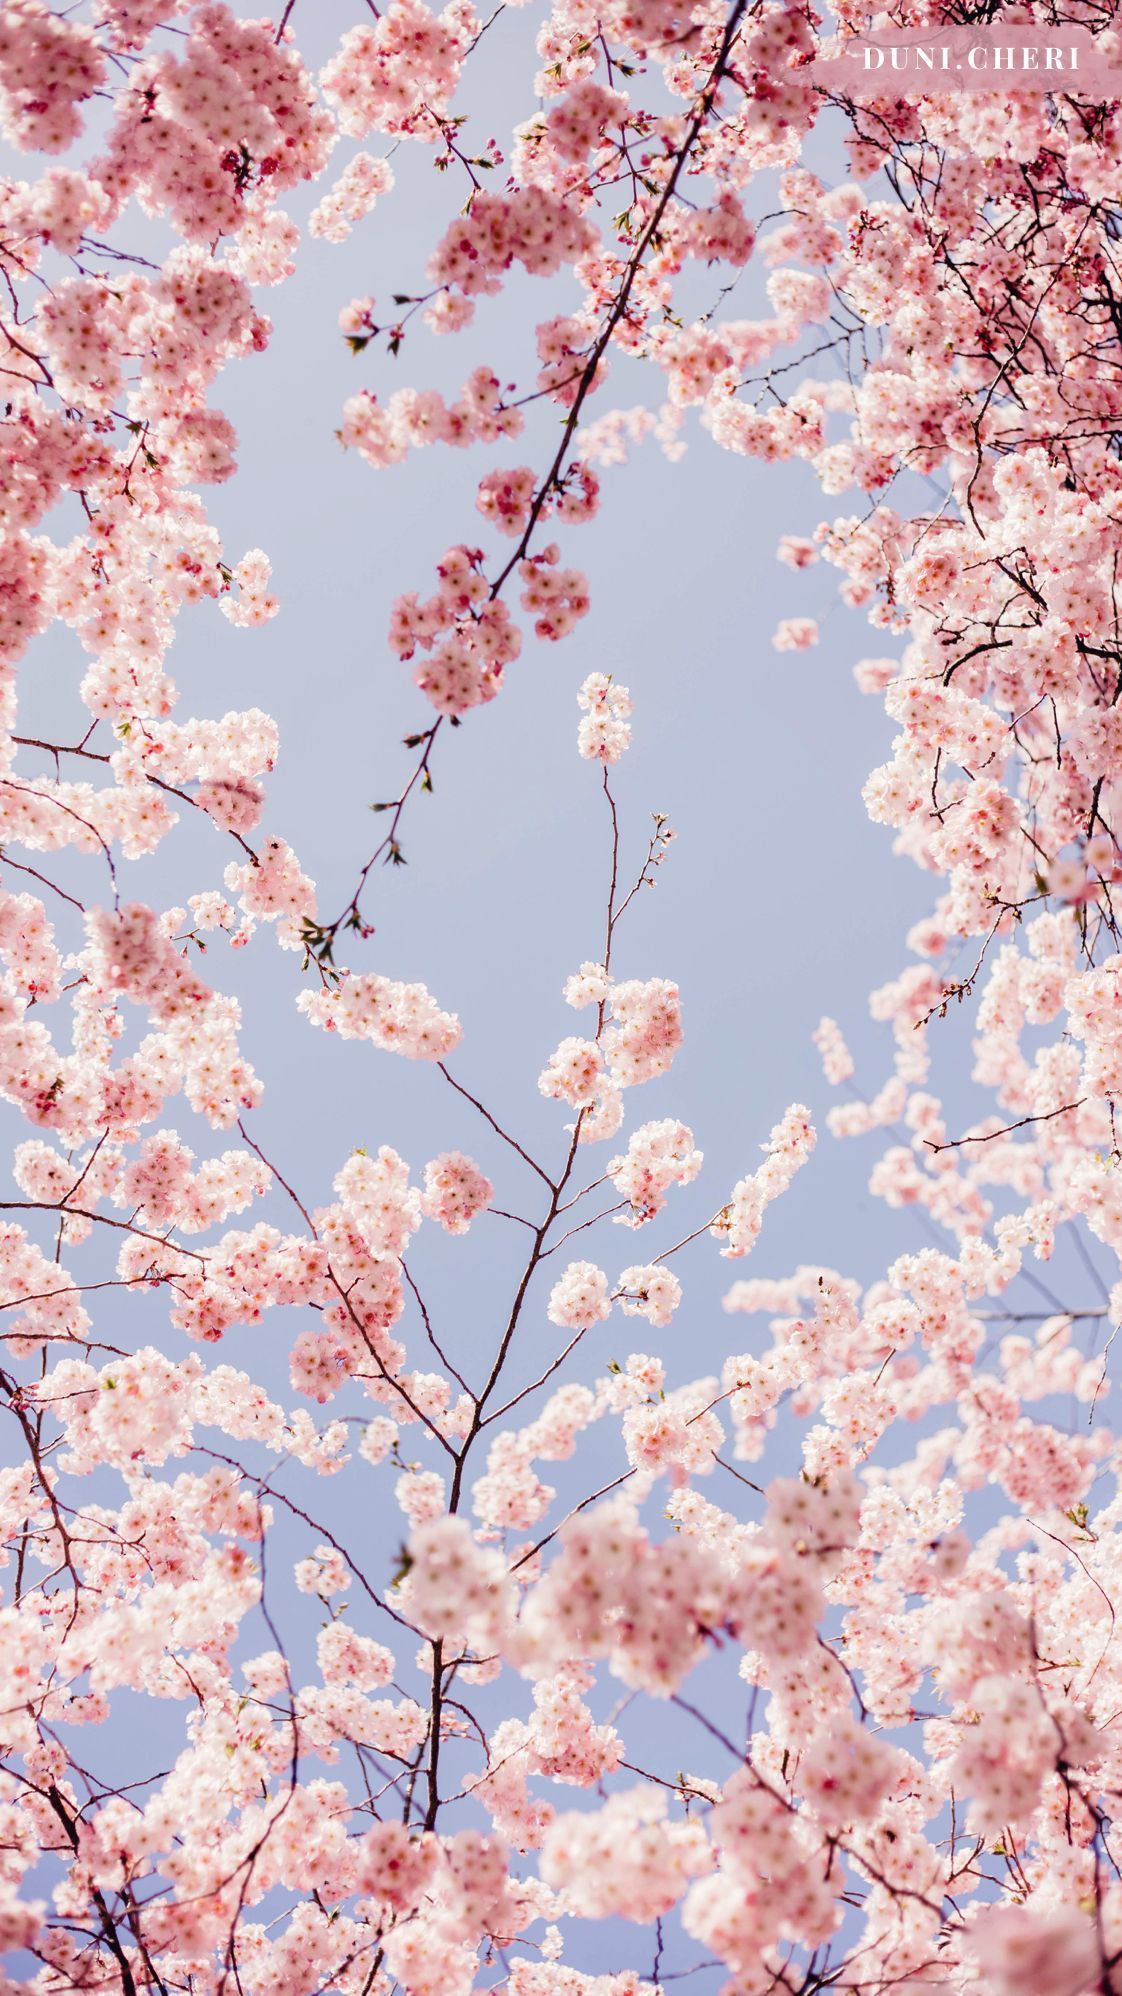 Pink cherry blossom tree wallpaper for your phone or desktop. - Cherry blossom, cherry